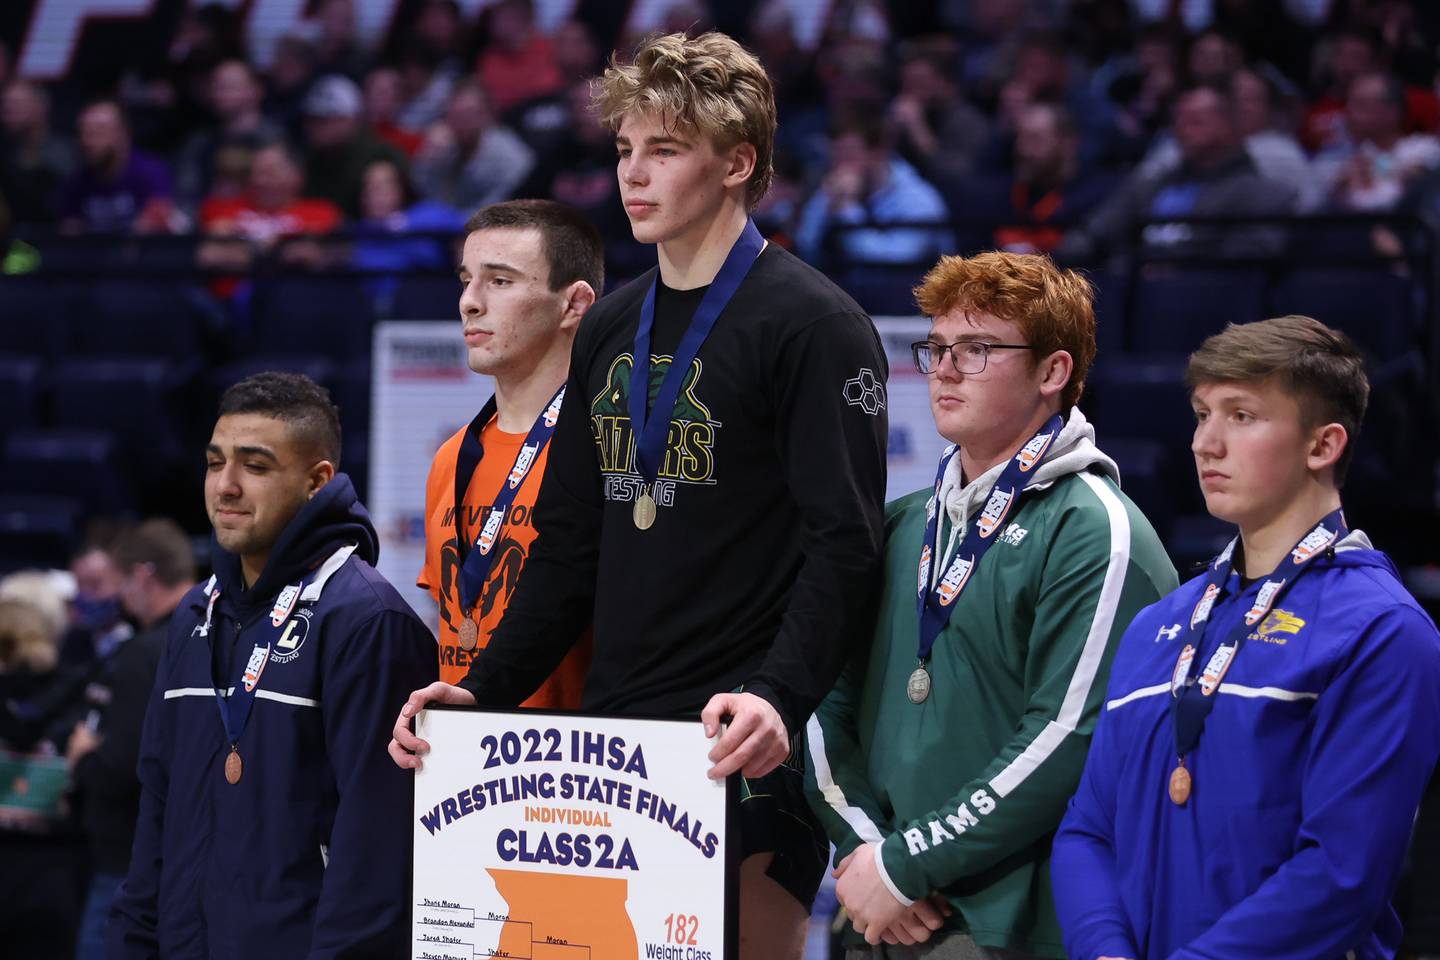 Crystal Lake South’s Shane Moran takes the podium as the Class 2A 182lb. champion at State Farm Center in Champaign. Saturday, Feb. 19, 2022, in Champaign.